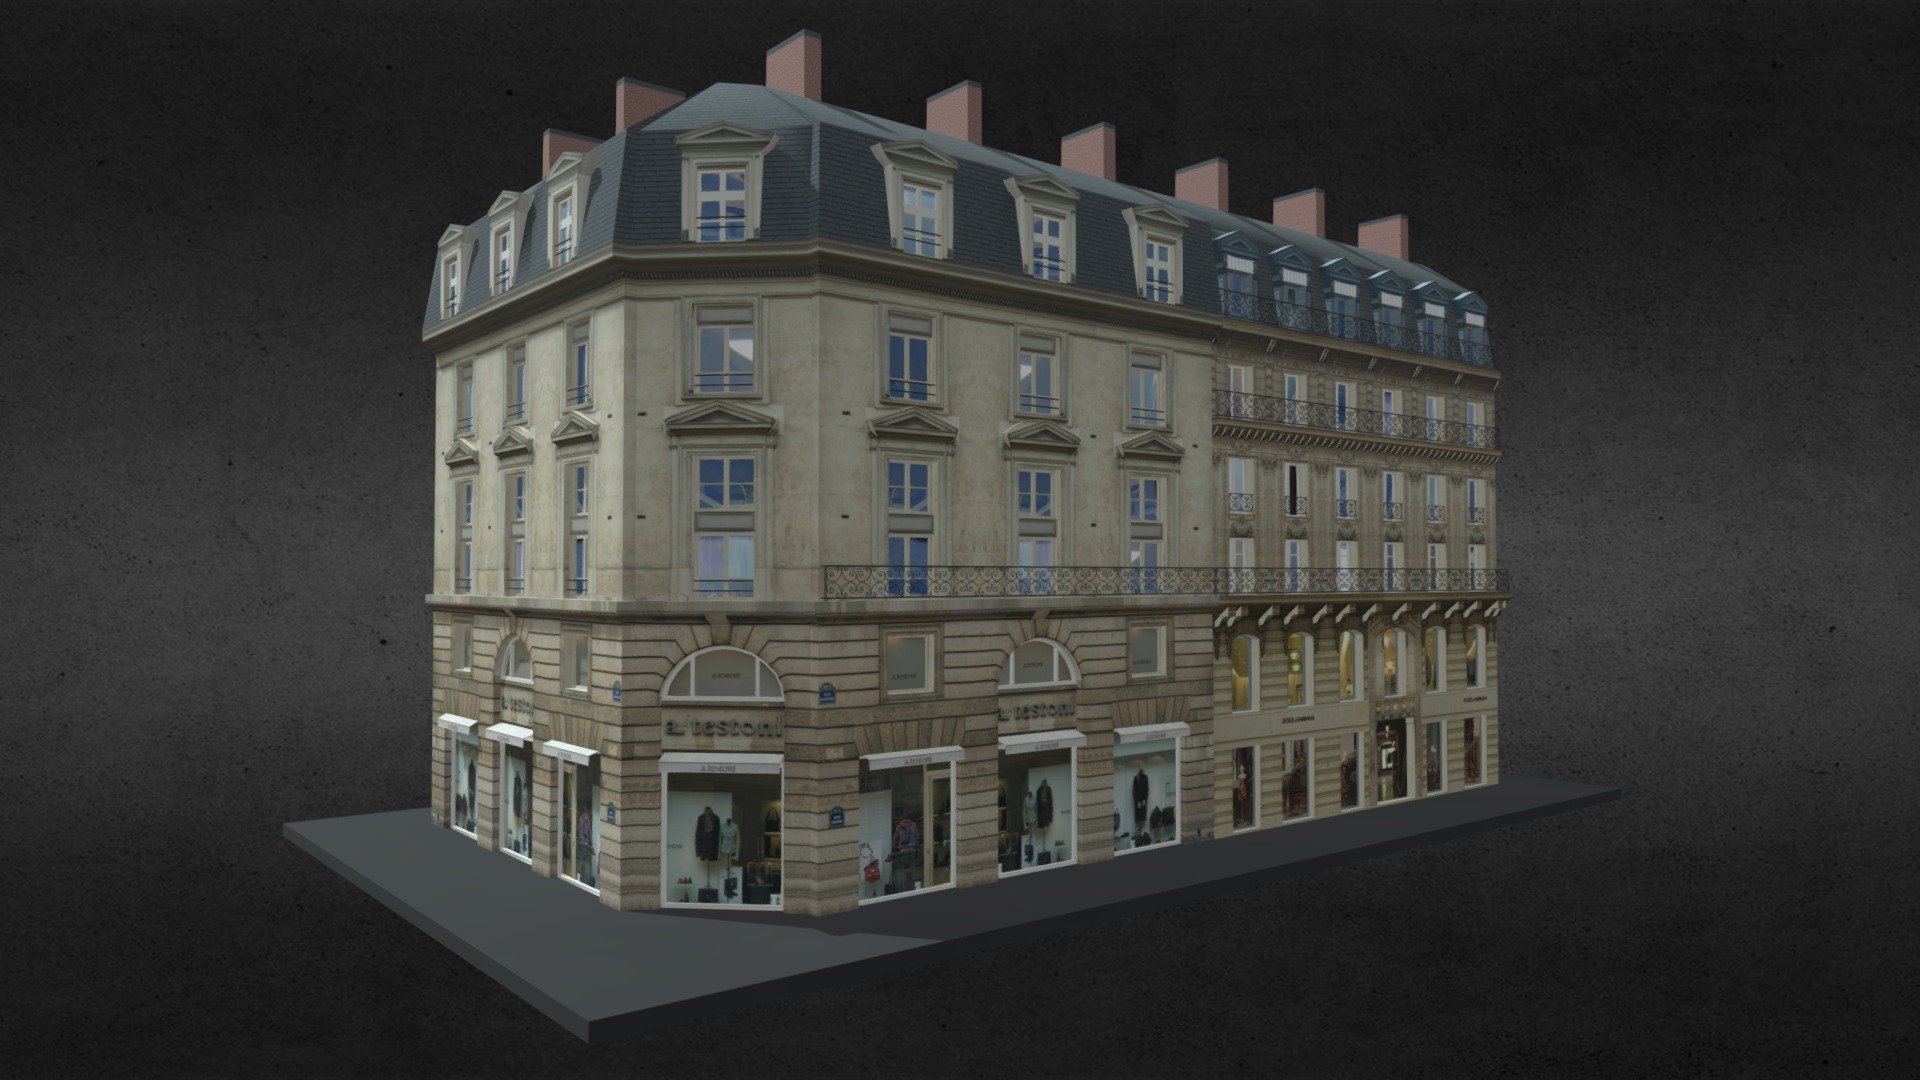 Typical Parisian Apartment Building 34
Originally created with 3ds Max 2015 and rendered in V-Ray 3.0. 

Total Poly Counts:
Poly Count = 92875
Vertex Count = 93723

Please Visit:
https://nuralam3d.blogspot.com/2021/09/typical-parisian-apartment-building-34.html - Typical Parisian Apartment Building 34 - 3D model by nuralam018 3d model